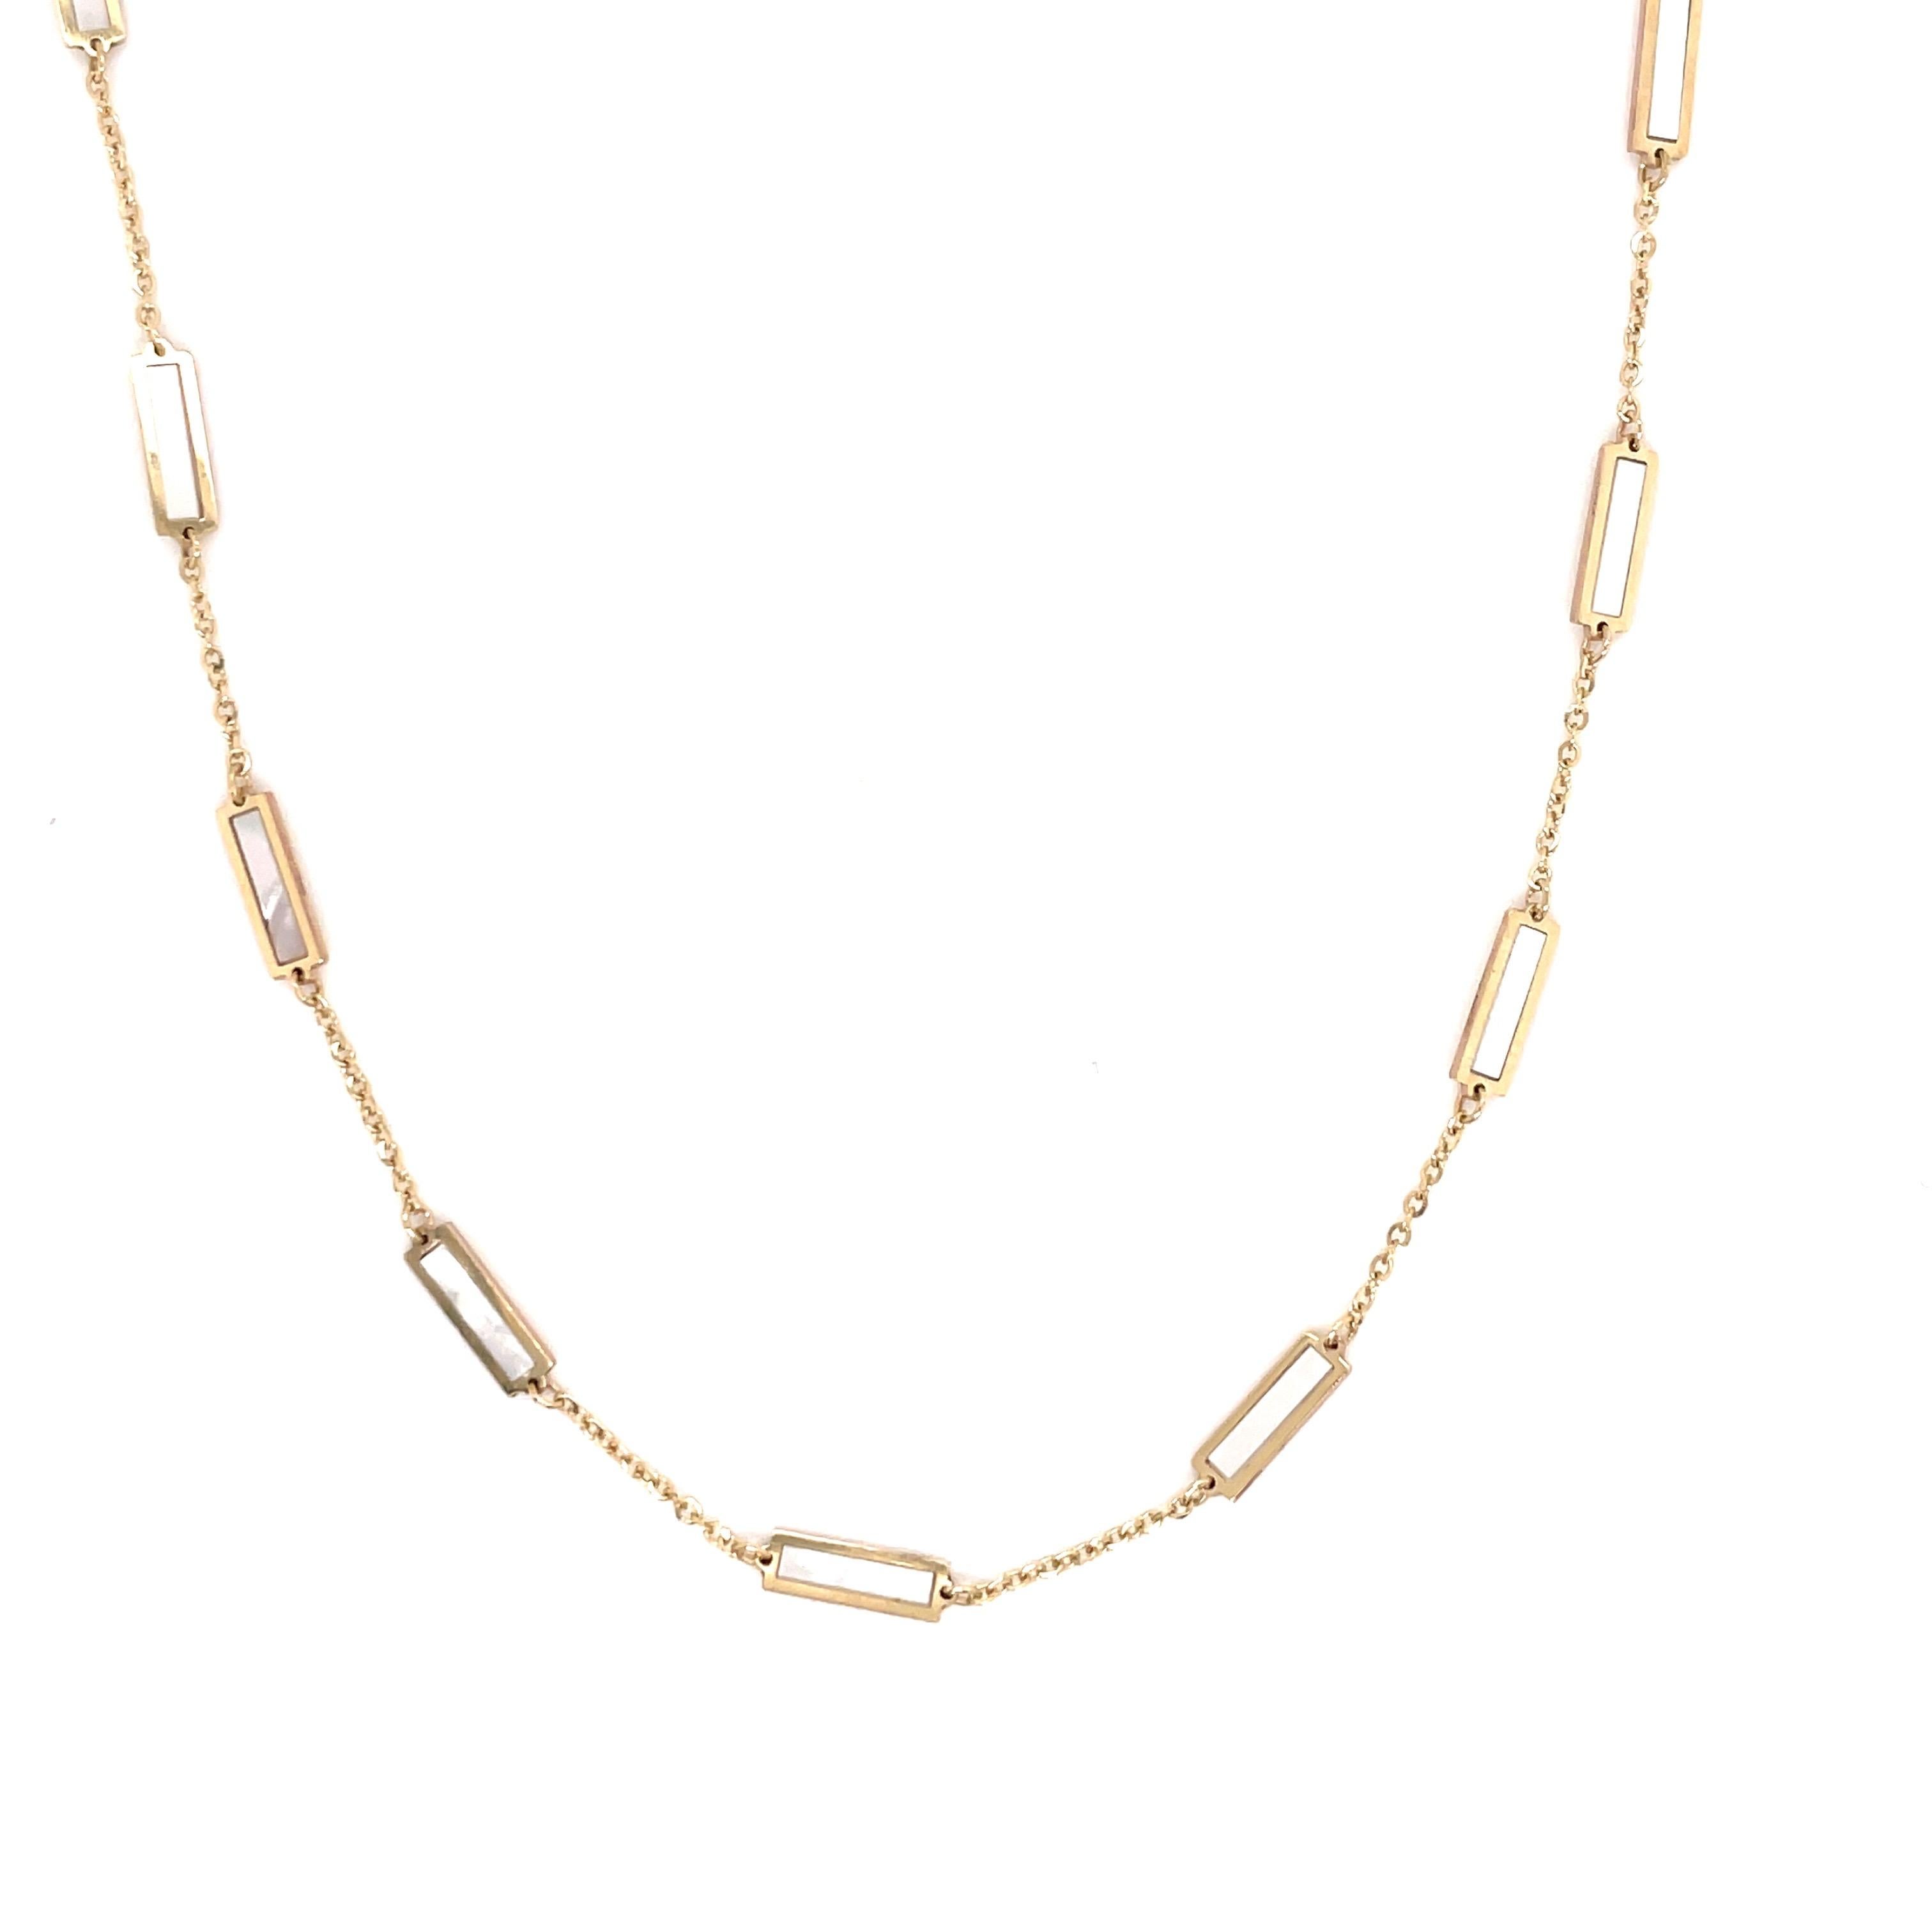 Italian Mother of Pearl Bar Chain Necklace 14 Karat Yellow Gold In New Condition For Sale In New York, NY